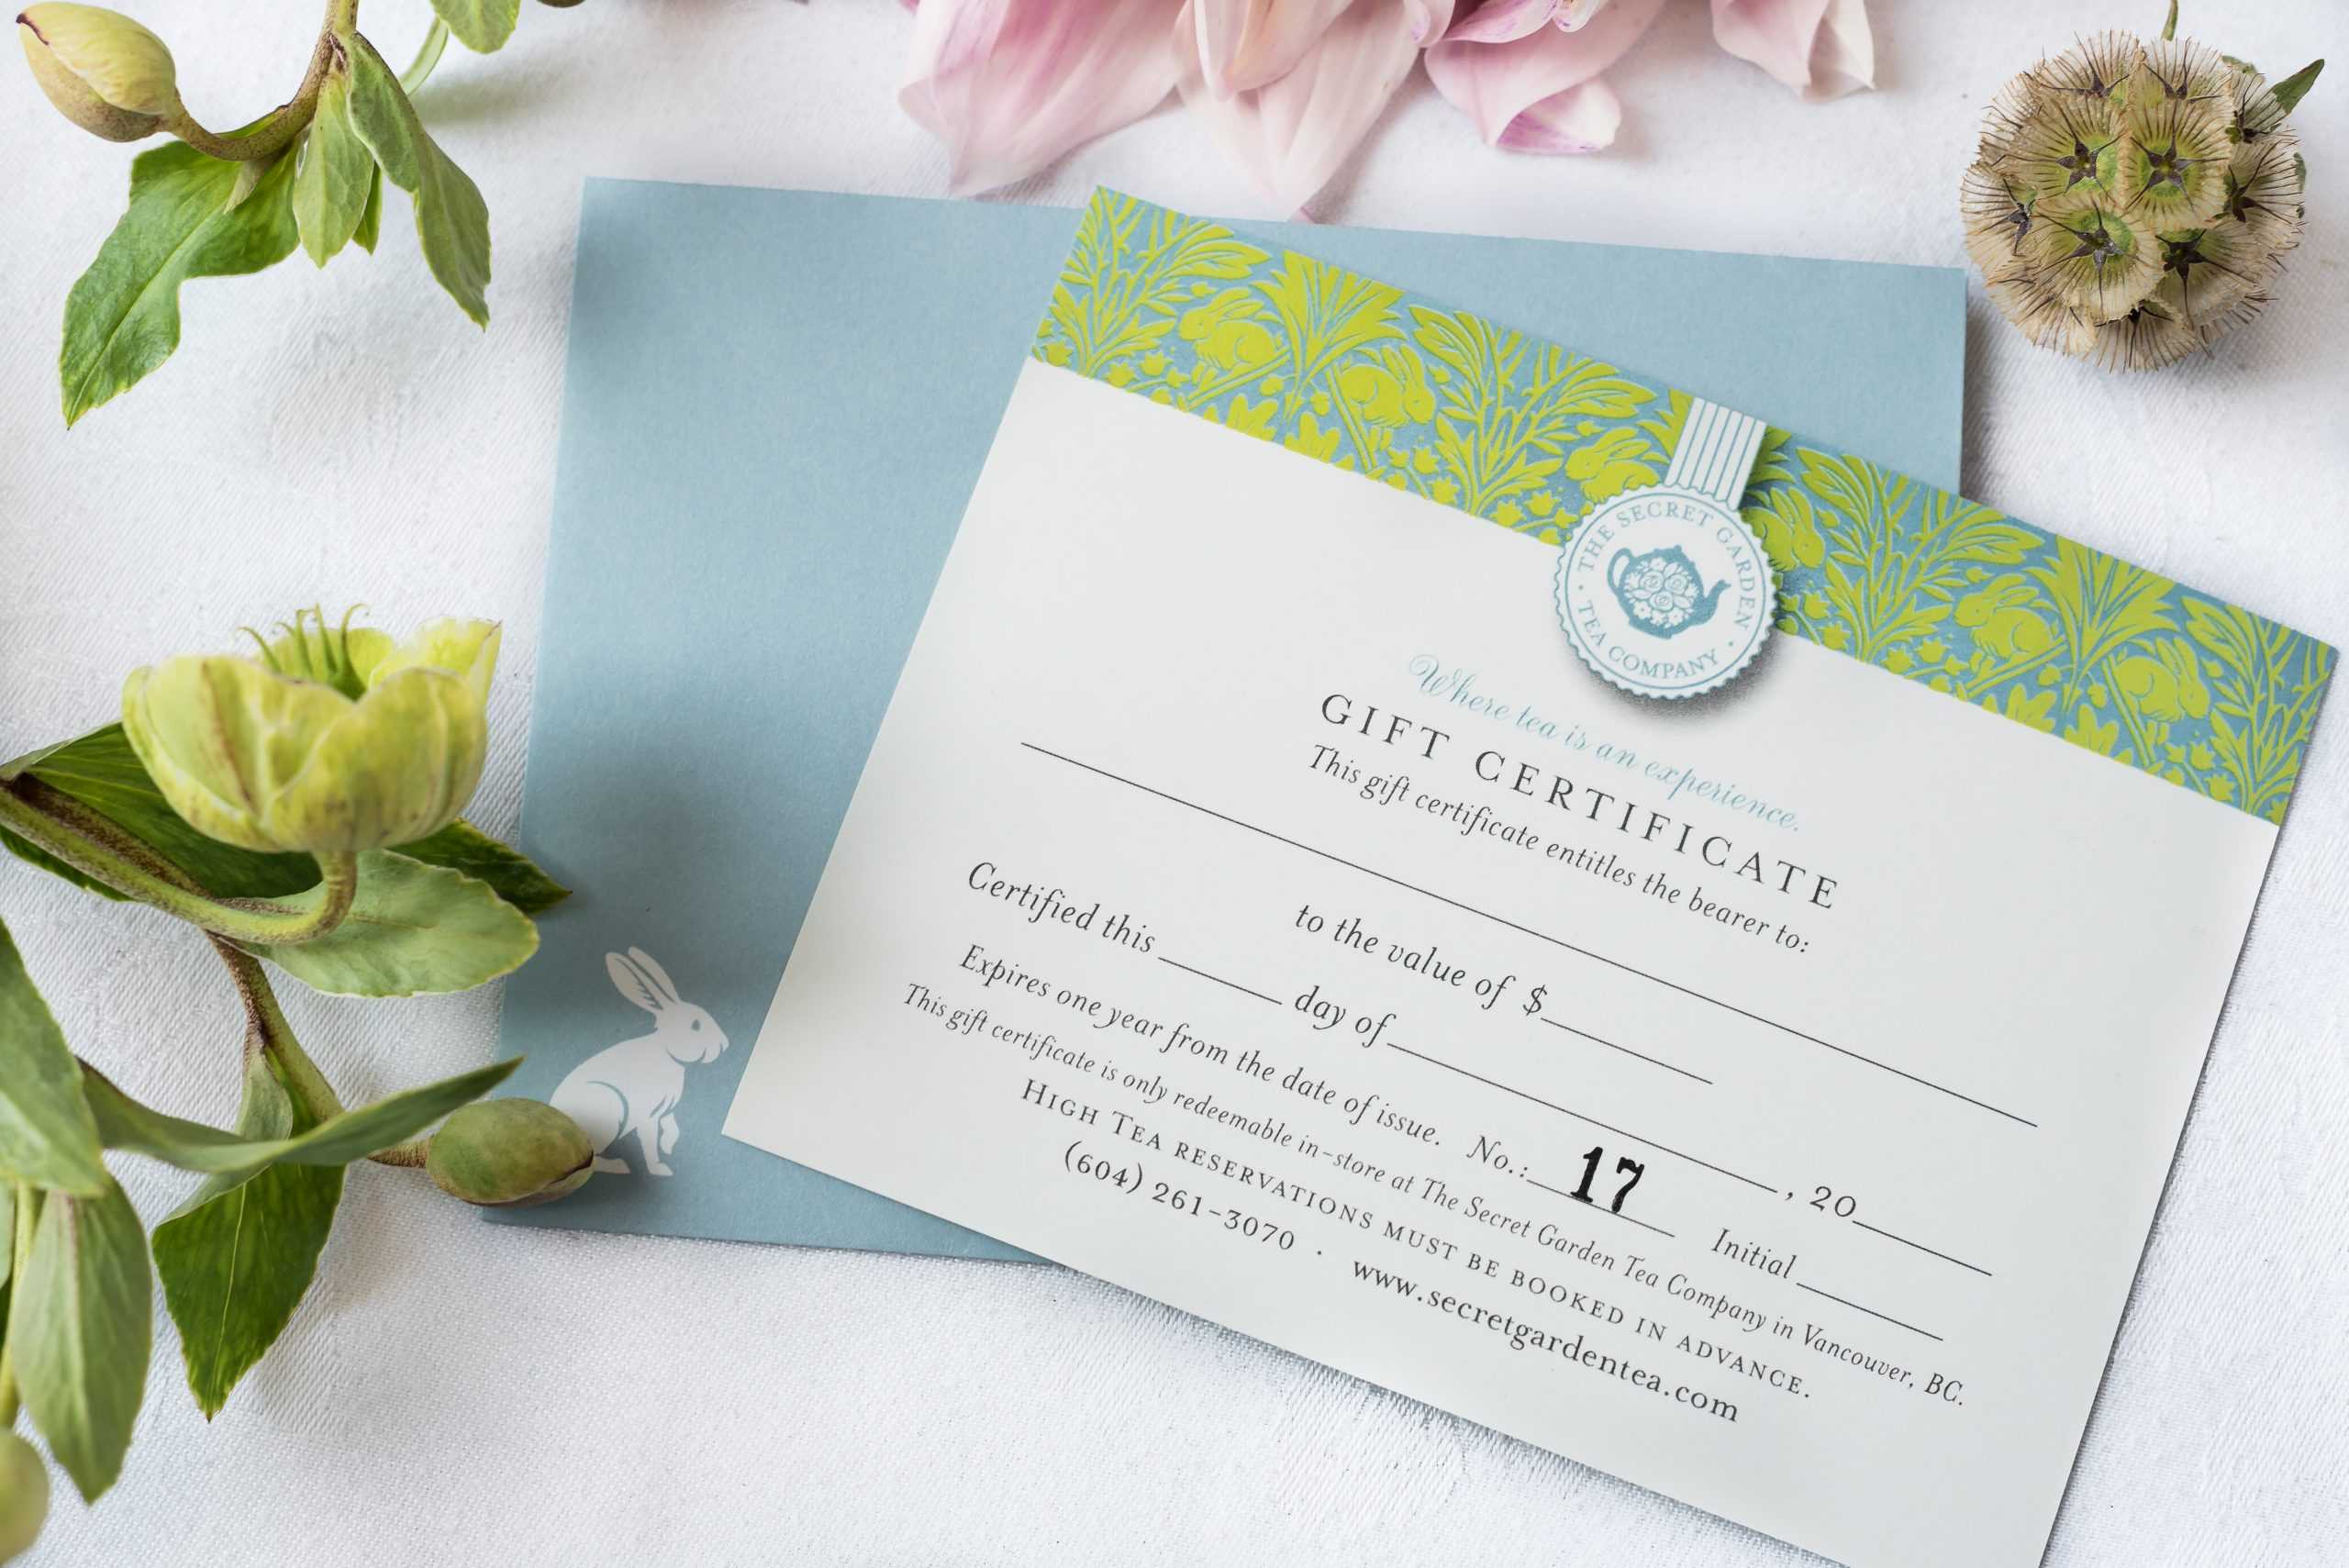 Gift Certificate (For In Store Use Only) With This Entitles The Bearer To Template Certificate